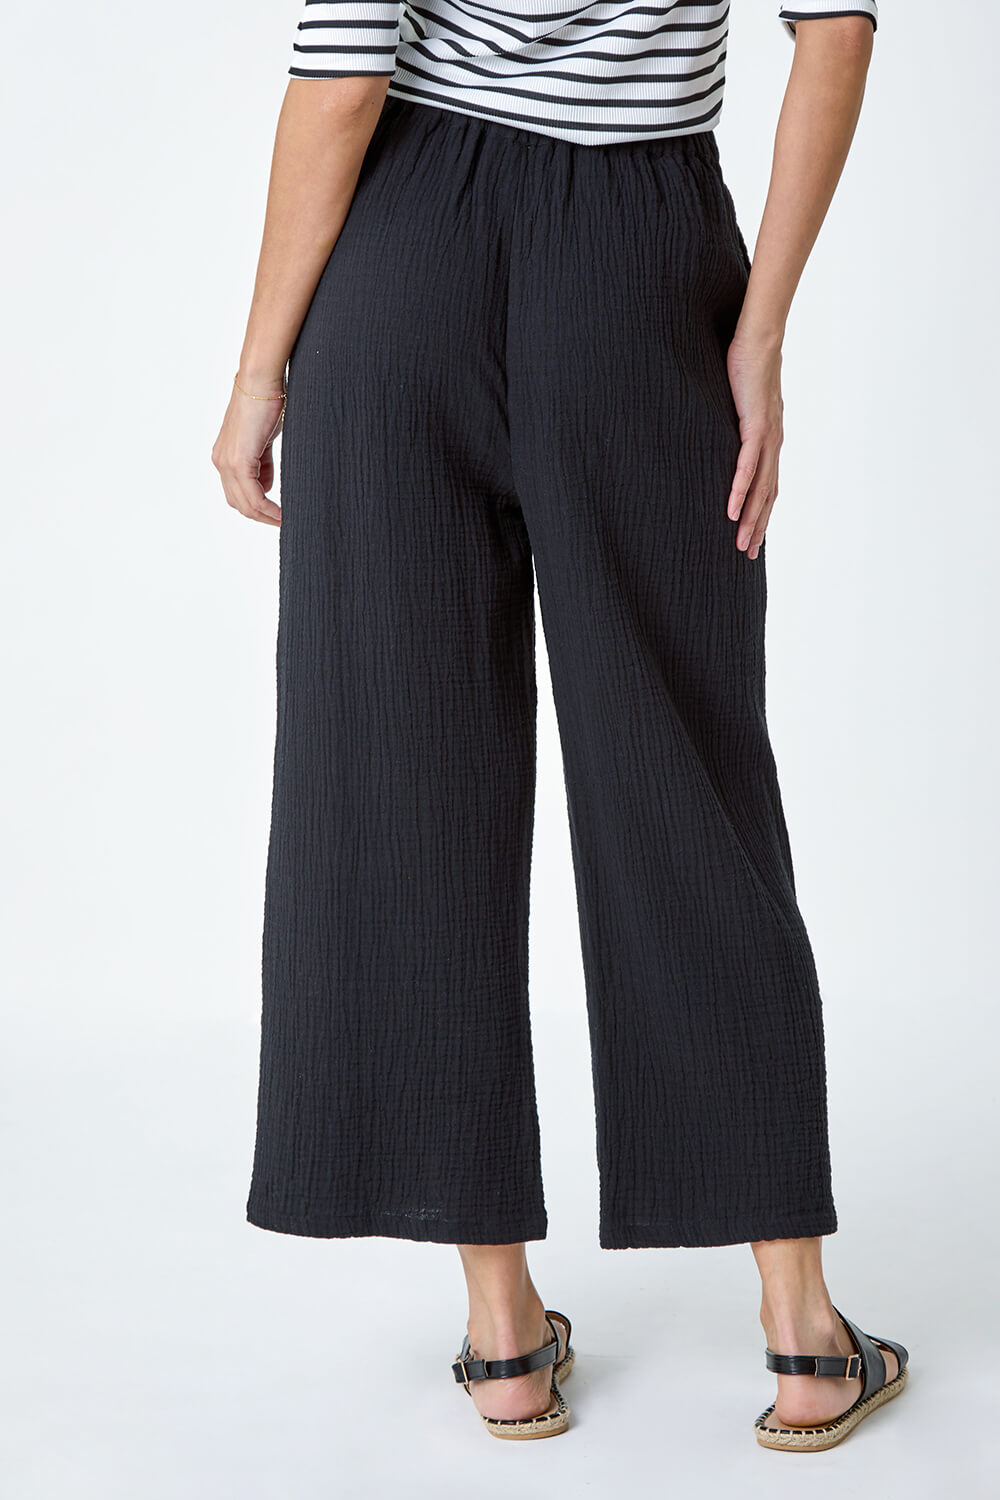 Black Textured Cotton Culotte Trousers, Image 3 of 5